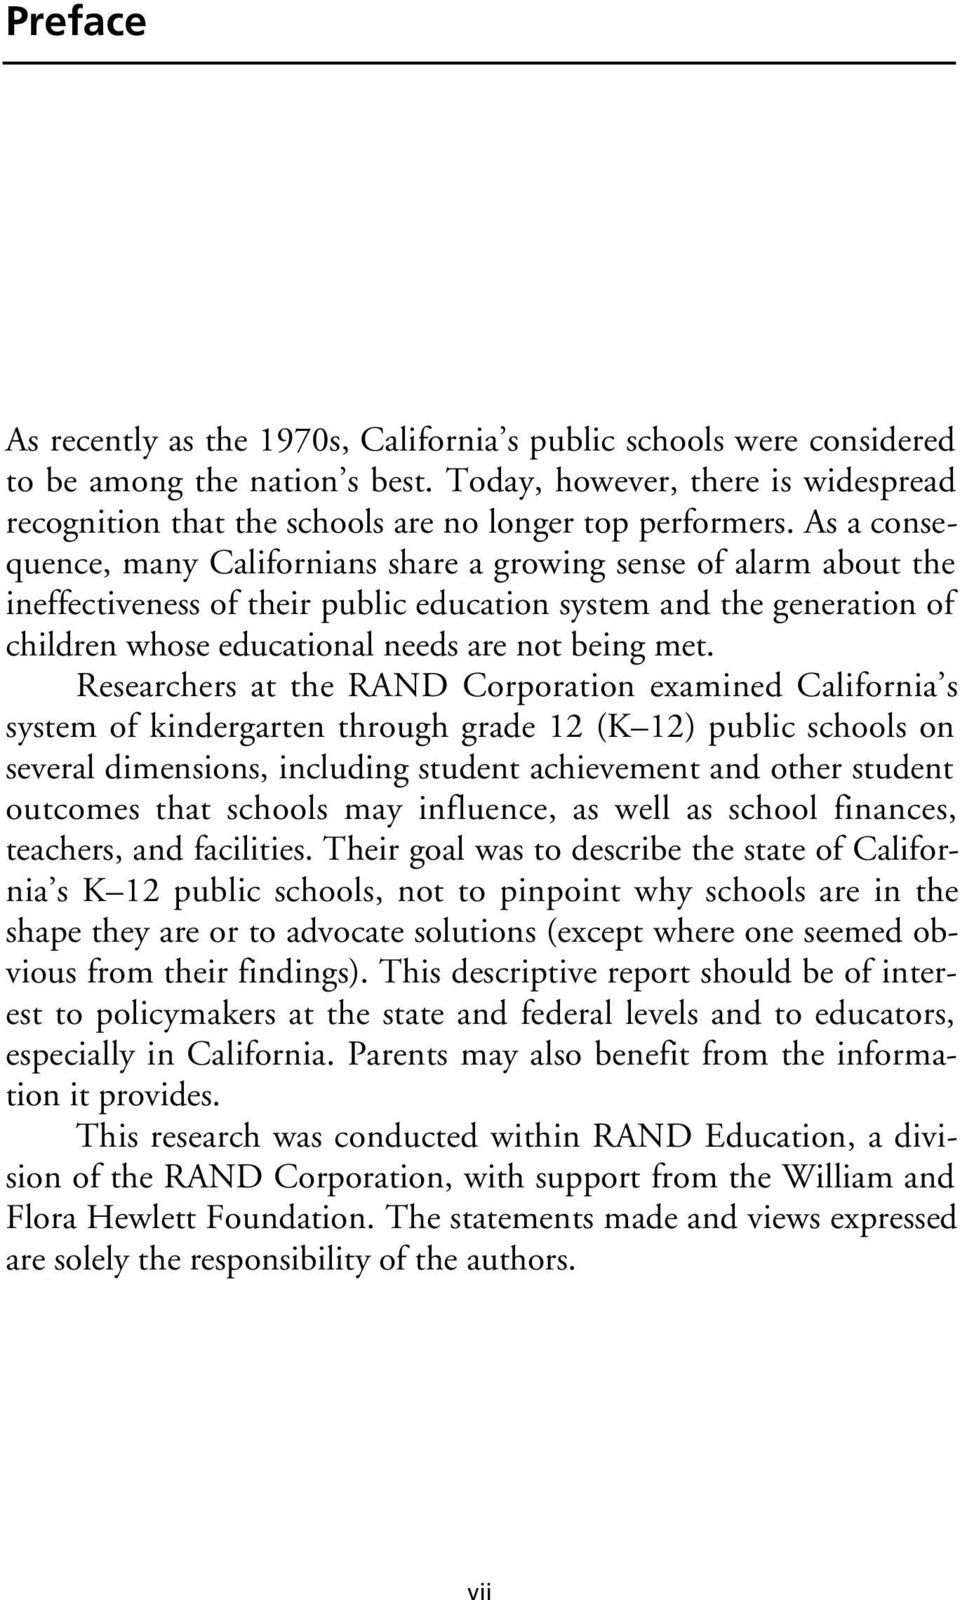 As a consequence, many Californians share a growing sense of alarm about the ineffectiveness of their public education system and the generation of children whose educational needs are not being met.